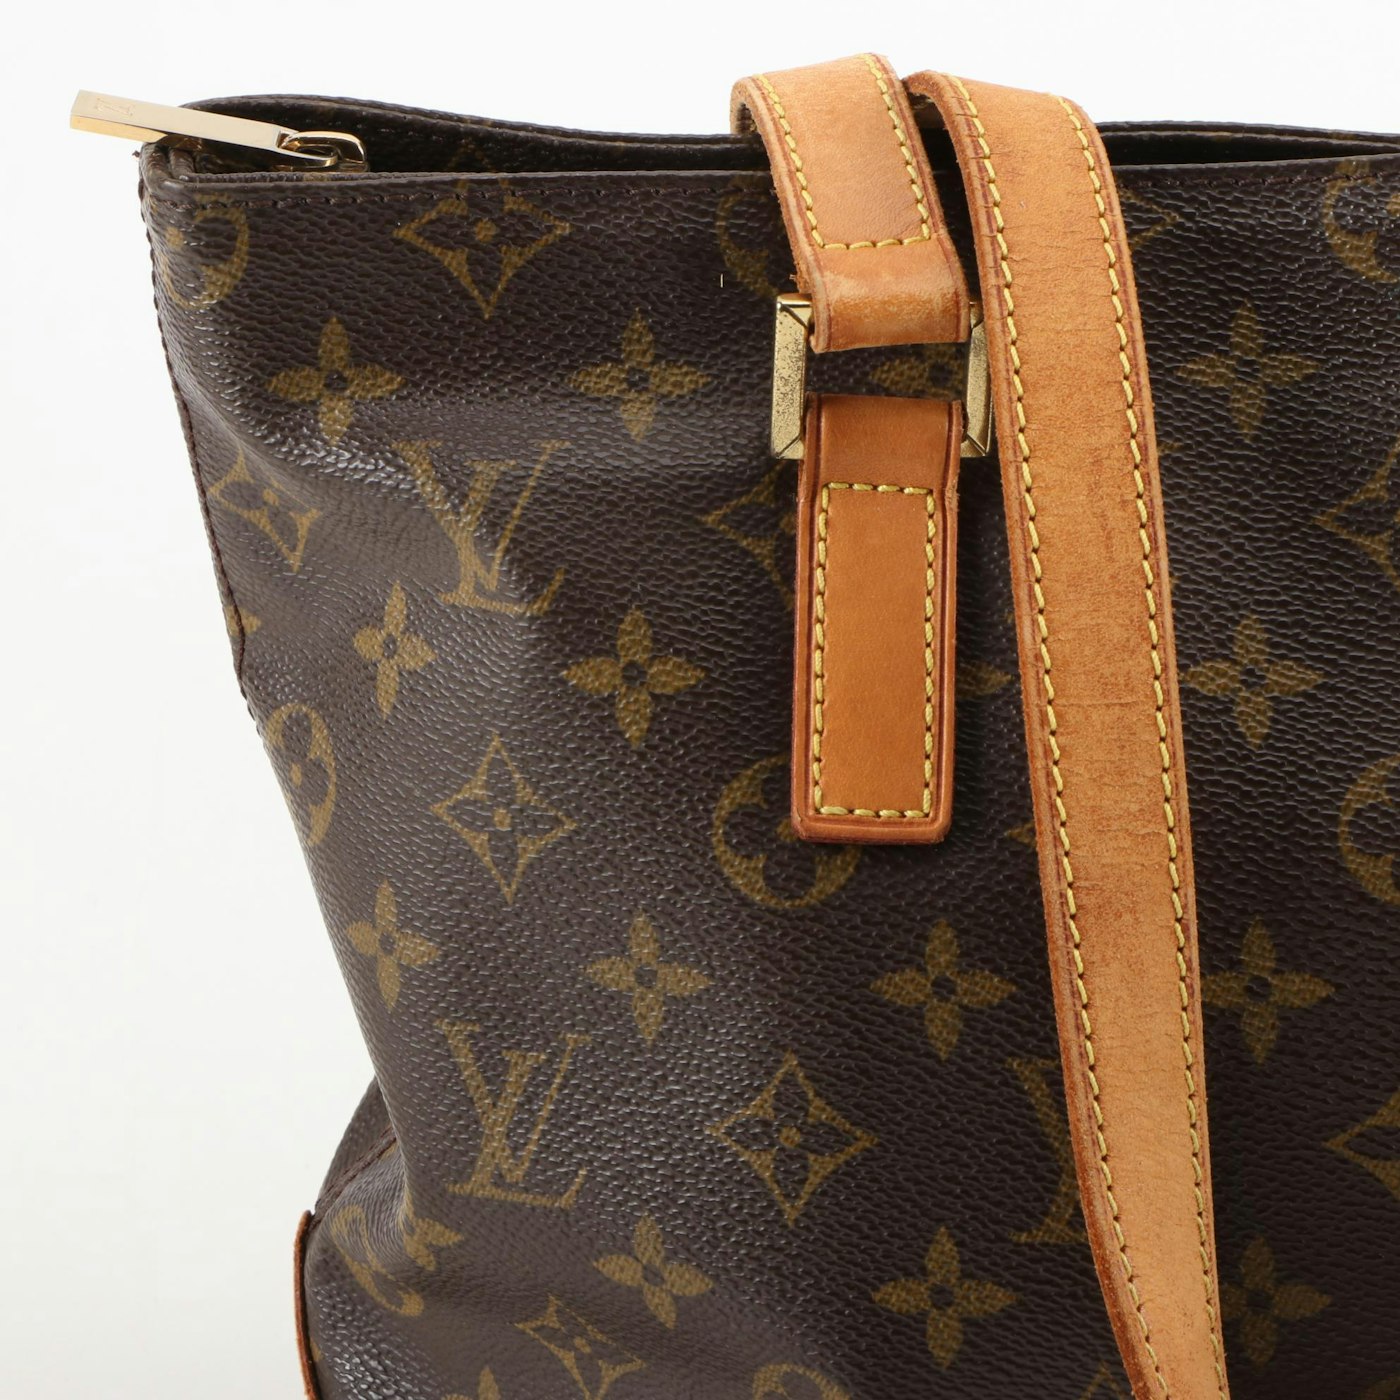 Louis Vuitton Cabas Piano Shoulder Tote Bag in Monogram Canvas and Leather | EBTH